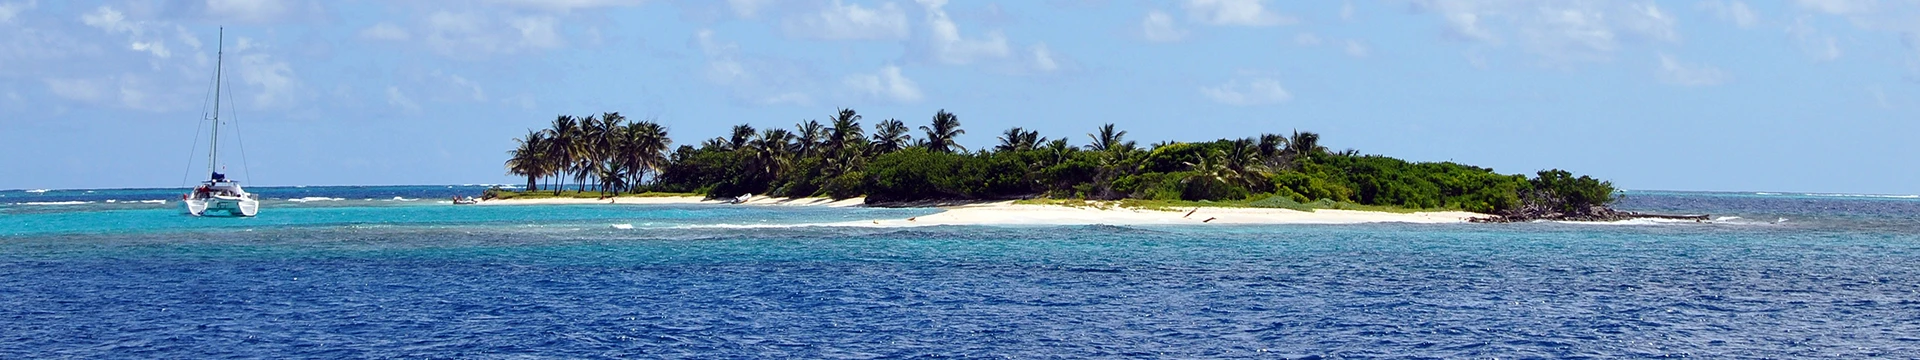 Hotels in St. Vincent and the Grenadines